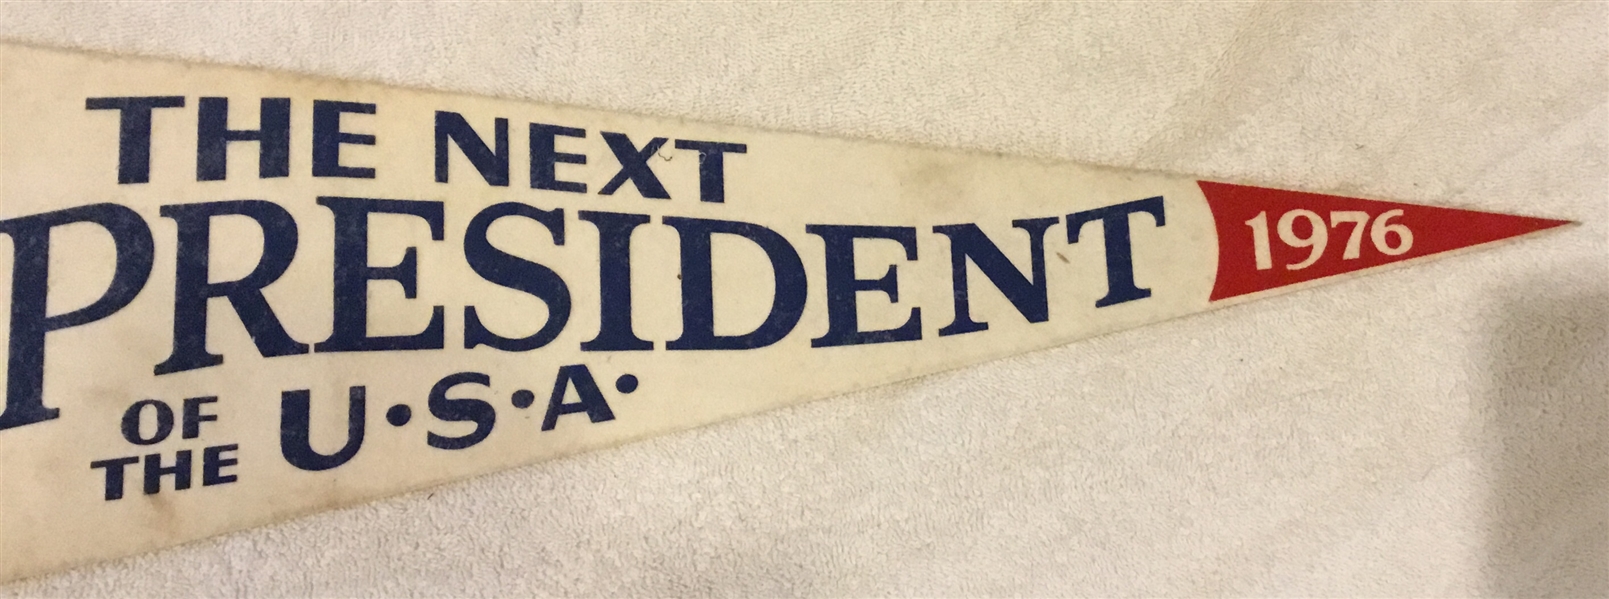 1976 JIMMY CARTER PRESIDENTIAL CAMPAIGN PENNANT